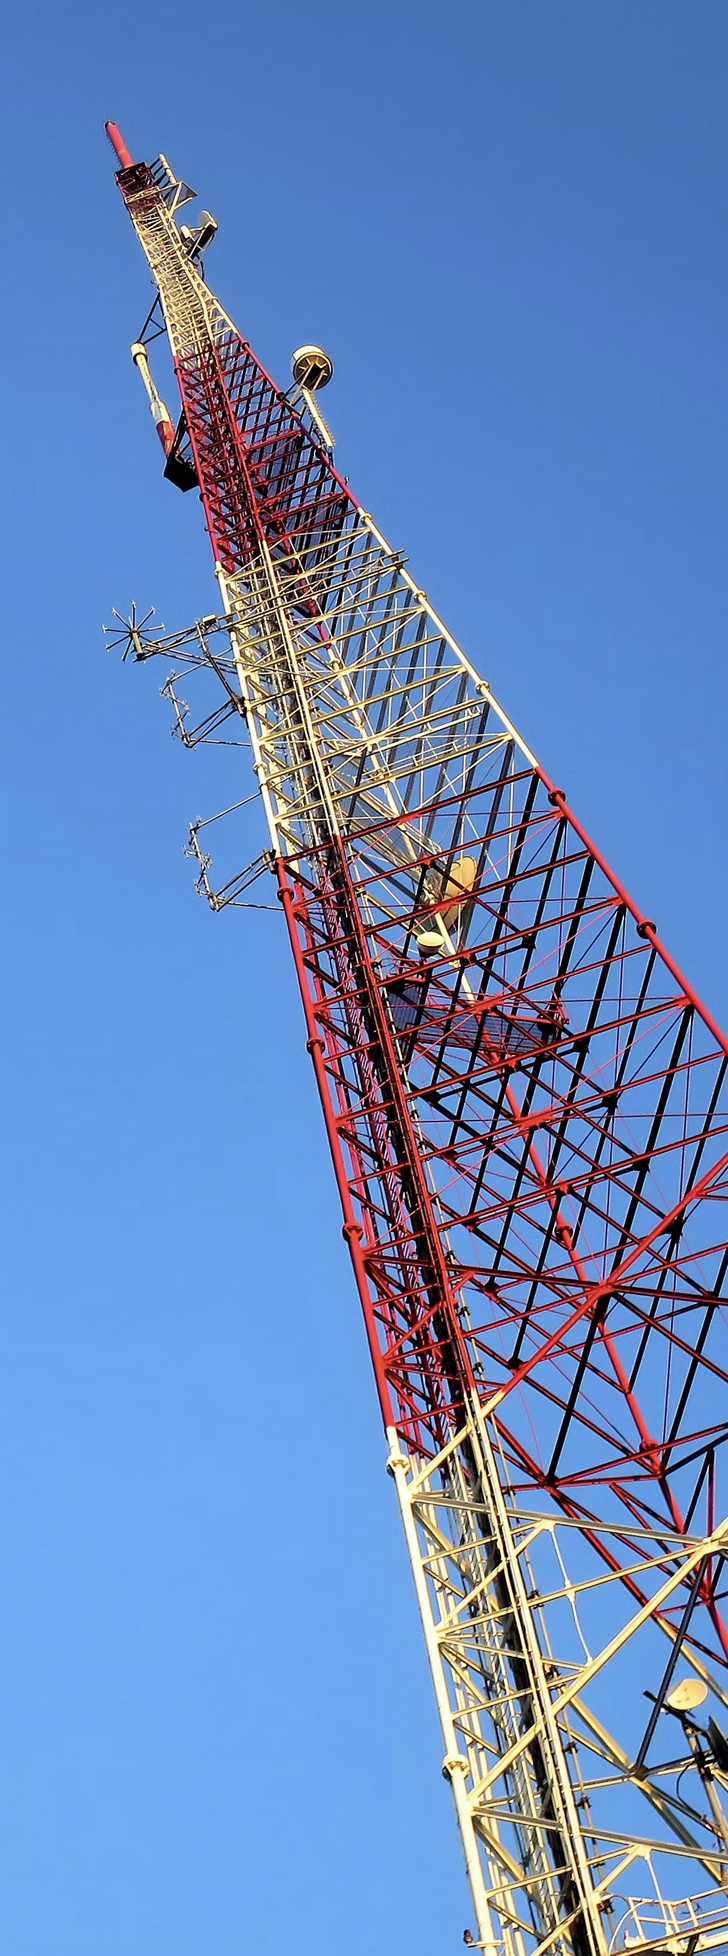 Image of One Tower against a blue sky.